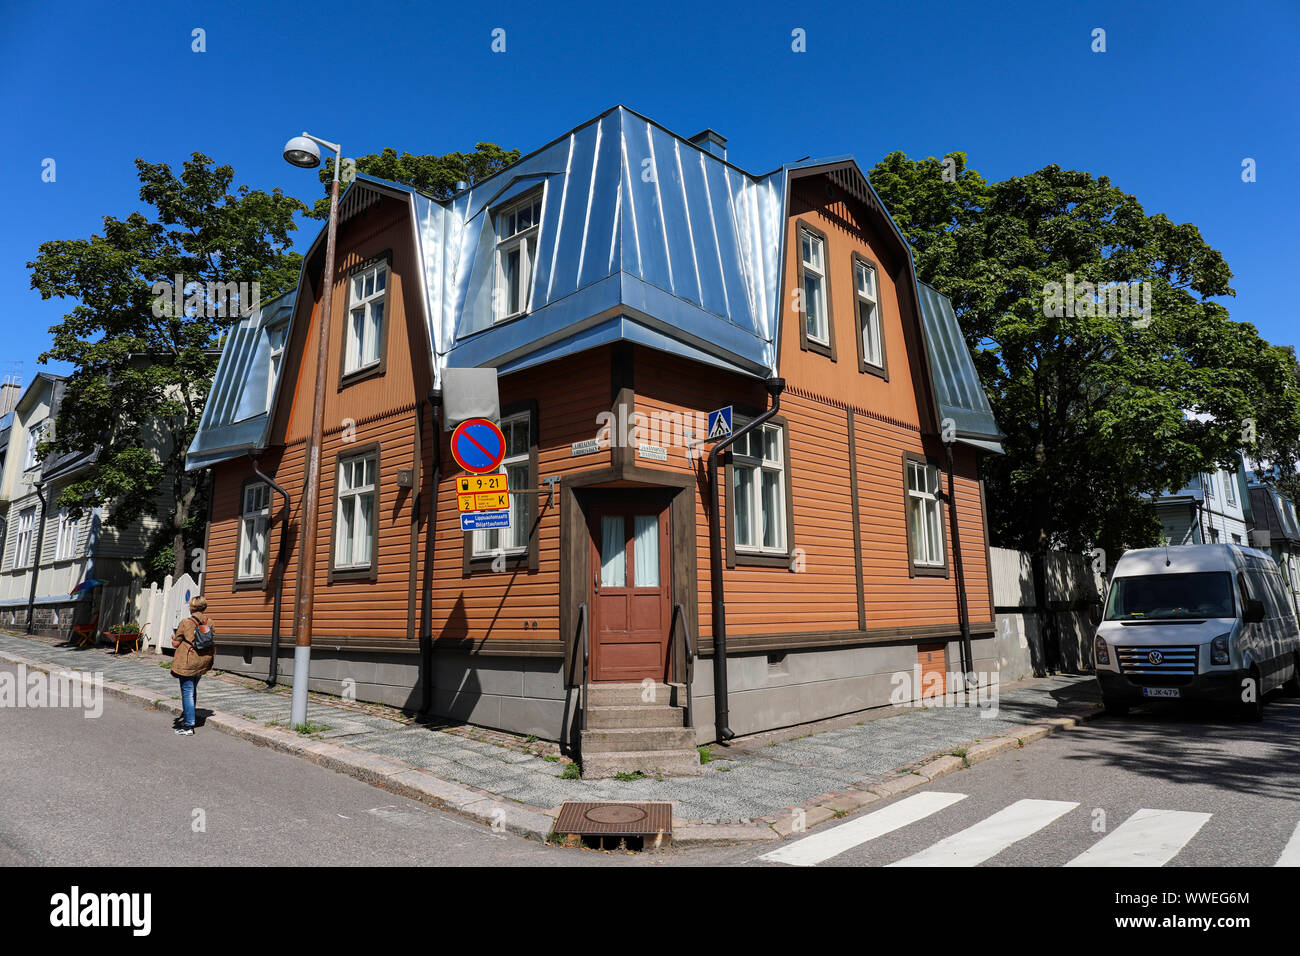 Old wooden building with shiny new metal roof in the corner of Virtaintie and Suvannontie in Helsinki, Finland Stock Photo